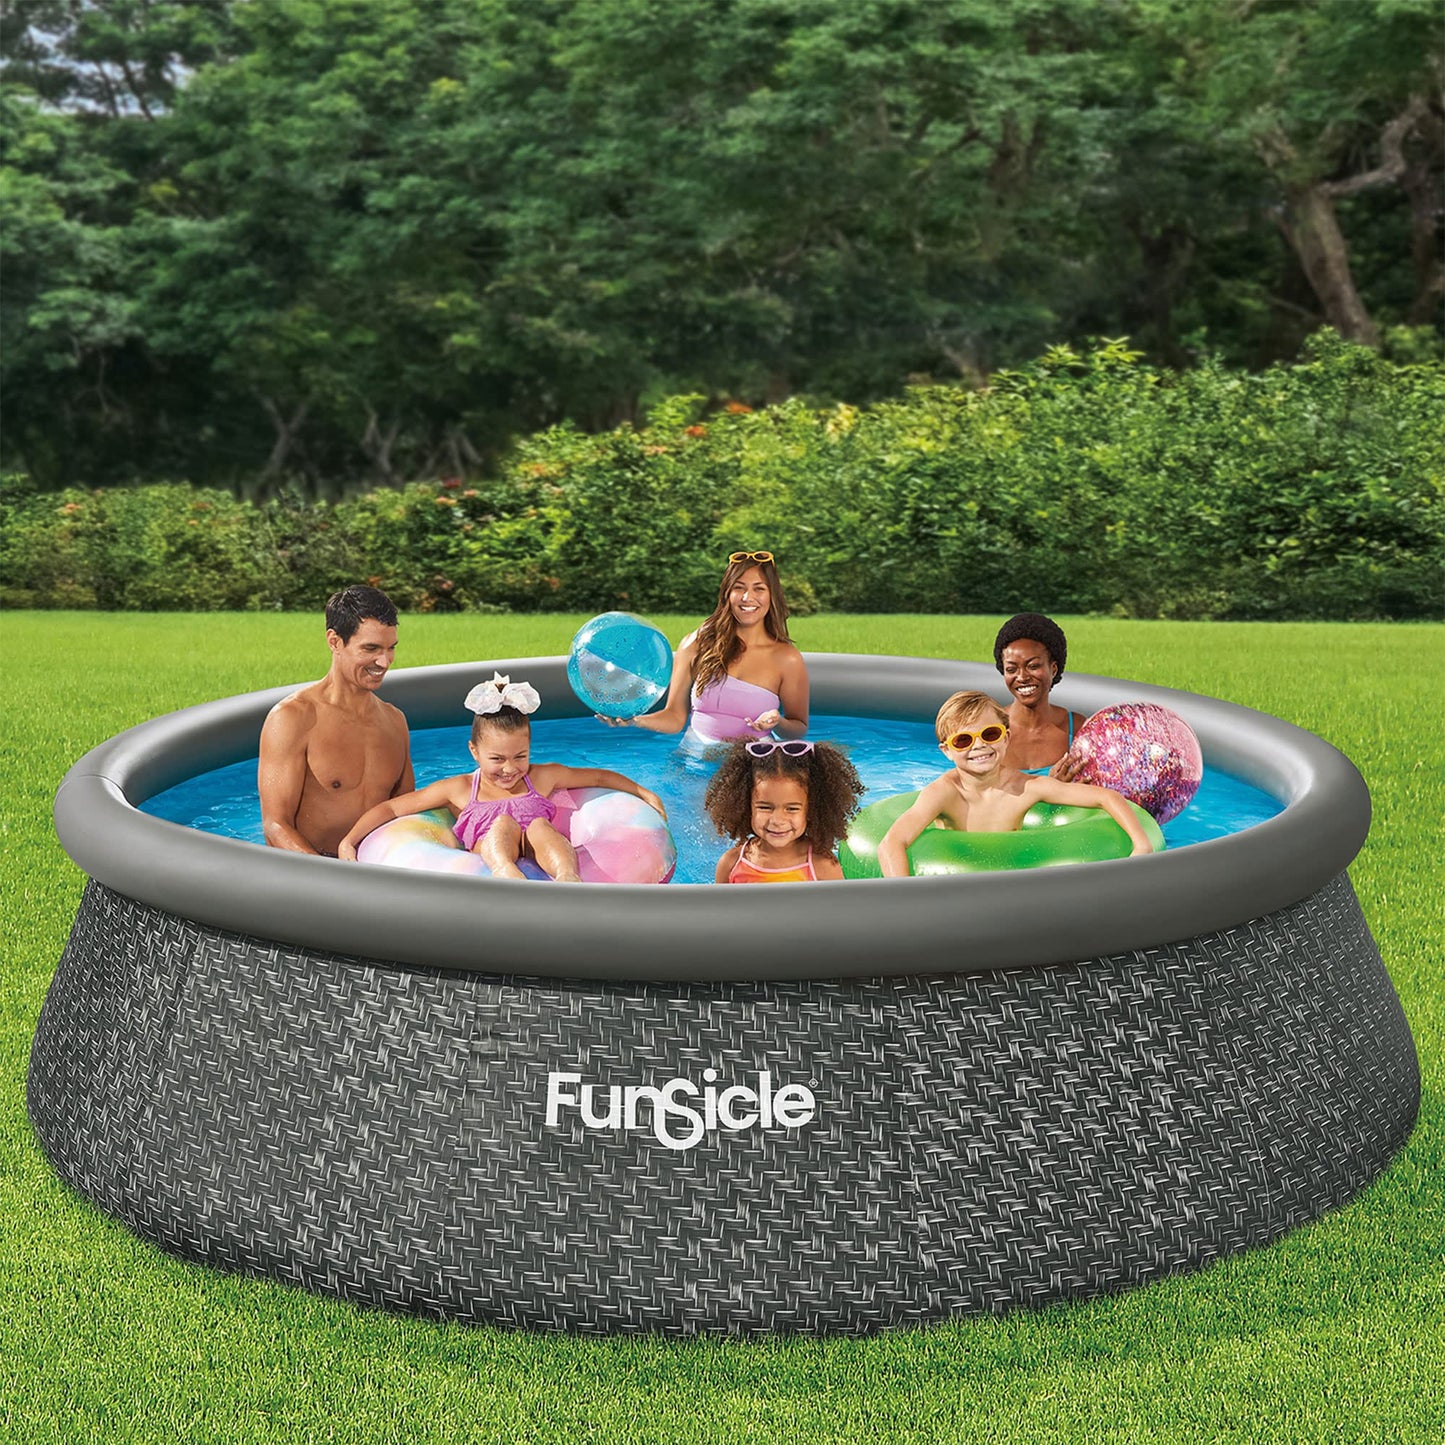 Funsicle 12 Foot by 36 Inch Quickset Round Inflatable Ring Top Outdoor Above Ground Swimming Pool Set with Pump and Cartridge Filter, Dark Herringbone